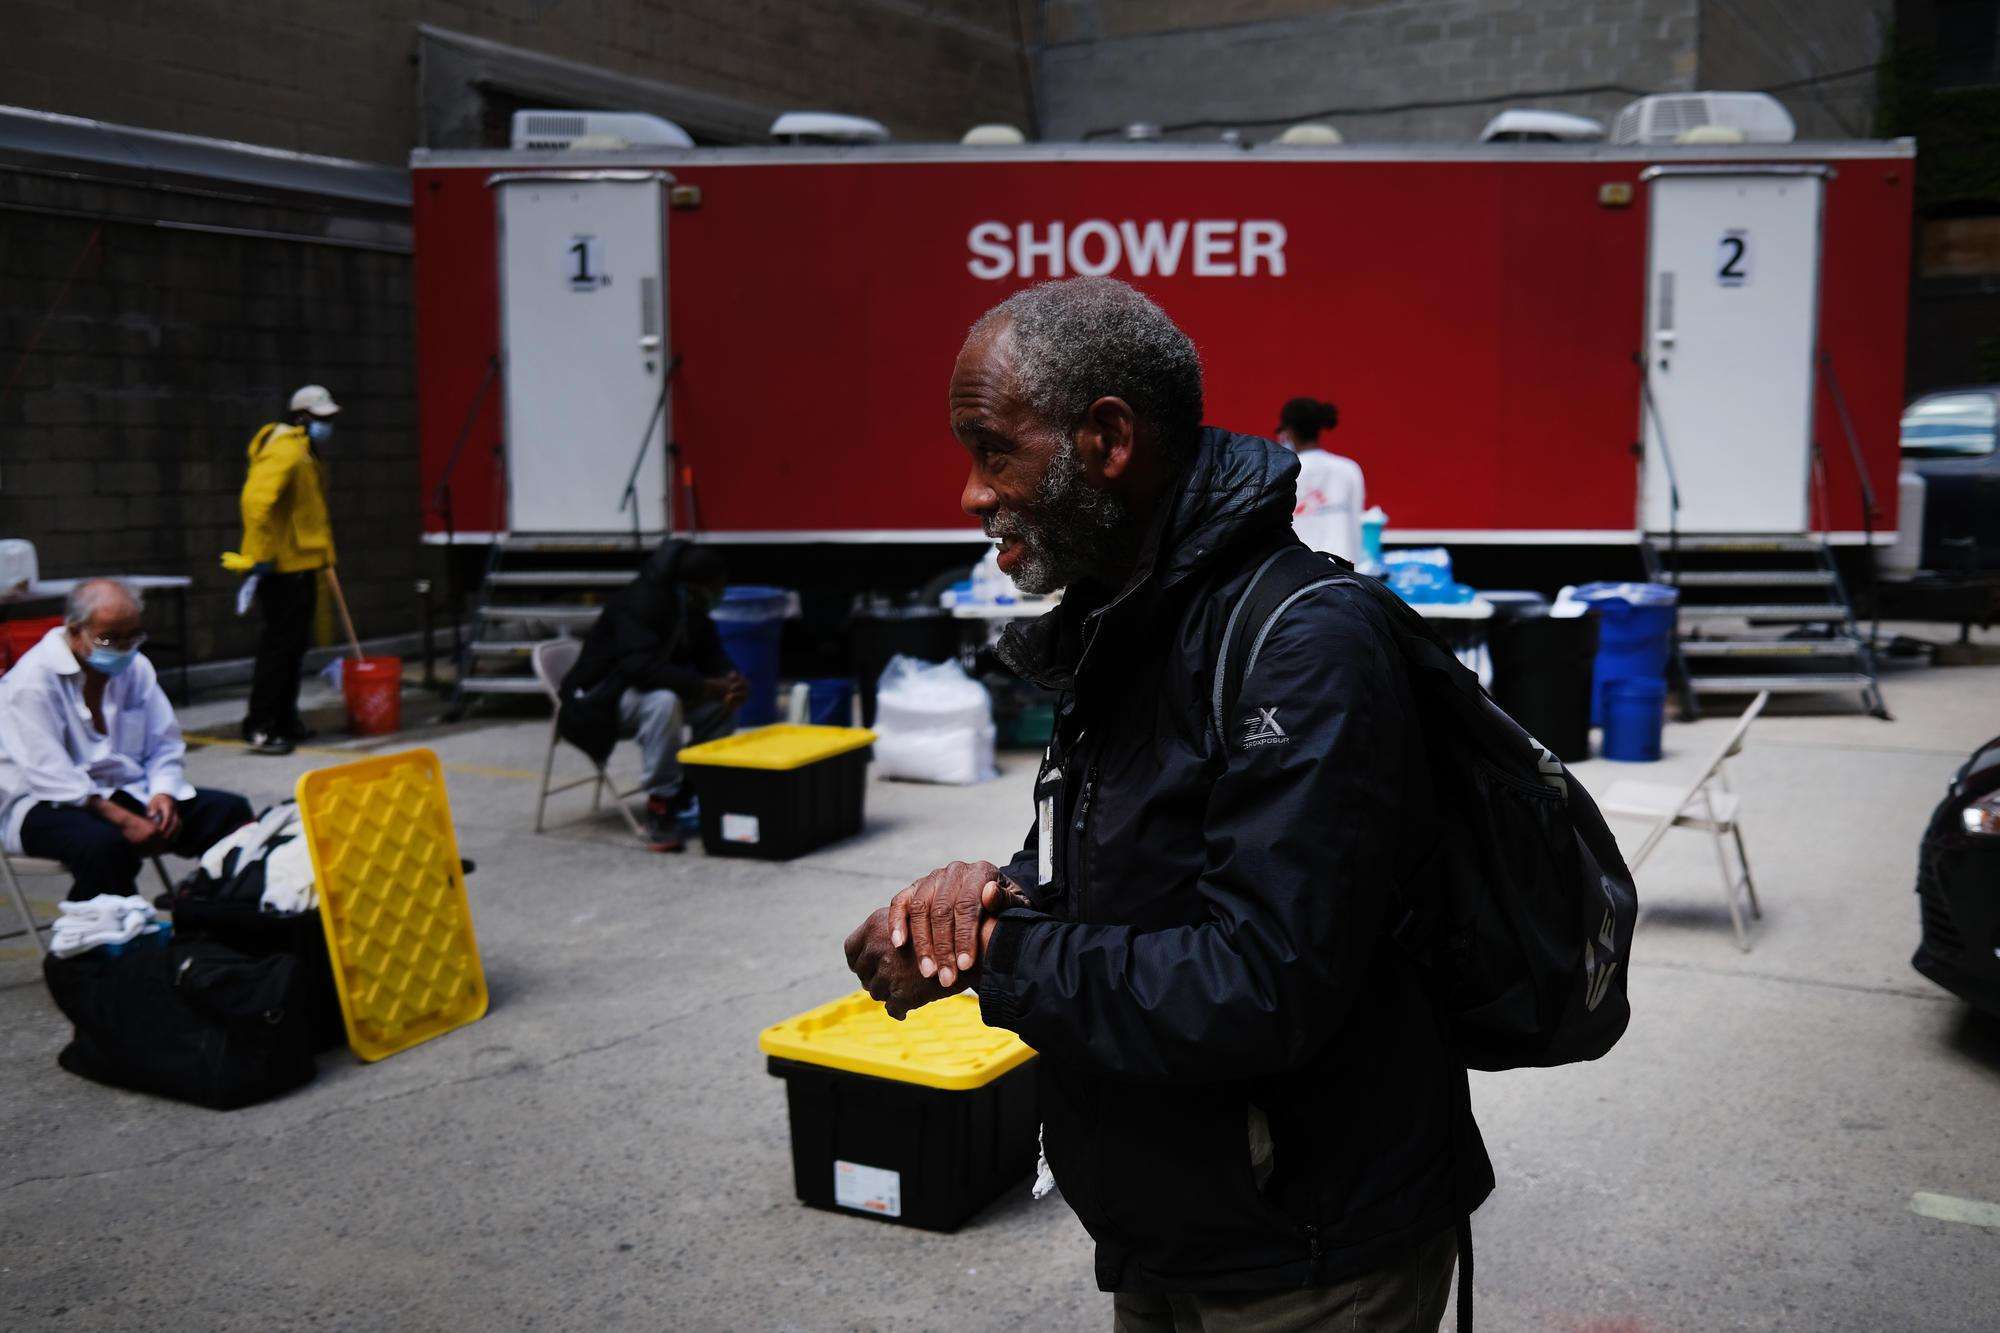 Shower Trailer Set Up For People Currently Homeless In NYC Amid COVID-19 Pandemic